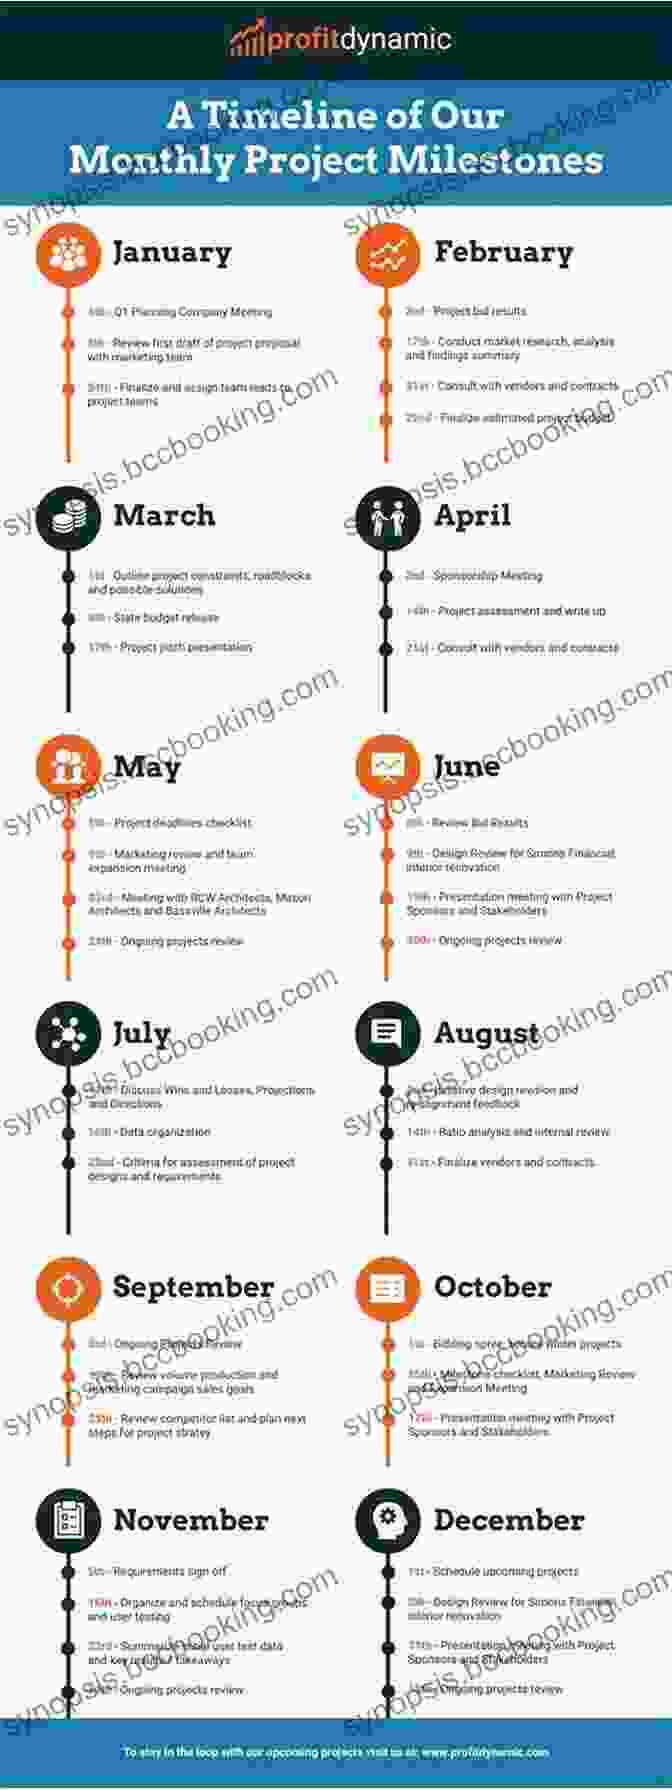 Timeline Infographic Illustrating Retirement Planning Milestones How To Avoid H E N R Y Syndrome (High Earner Not Rich Yet): Financial Strategies To Own Your Future